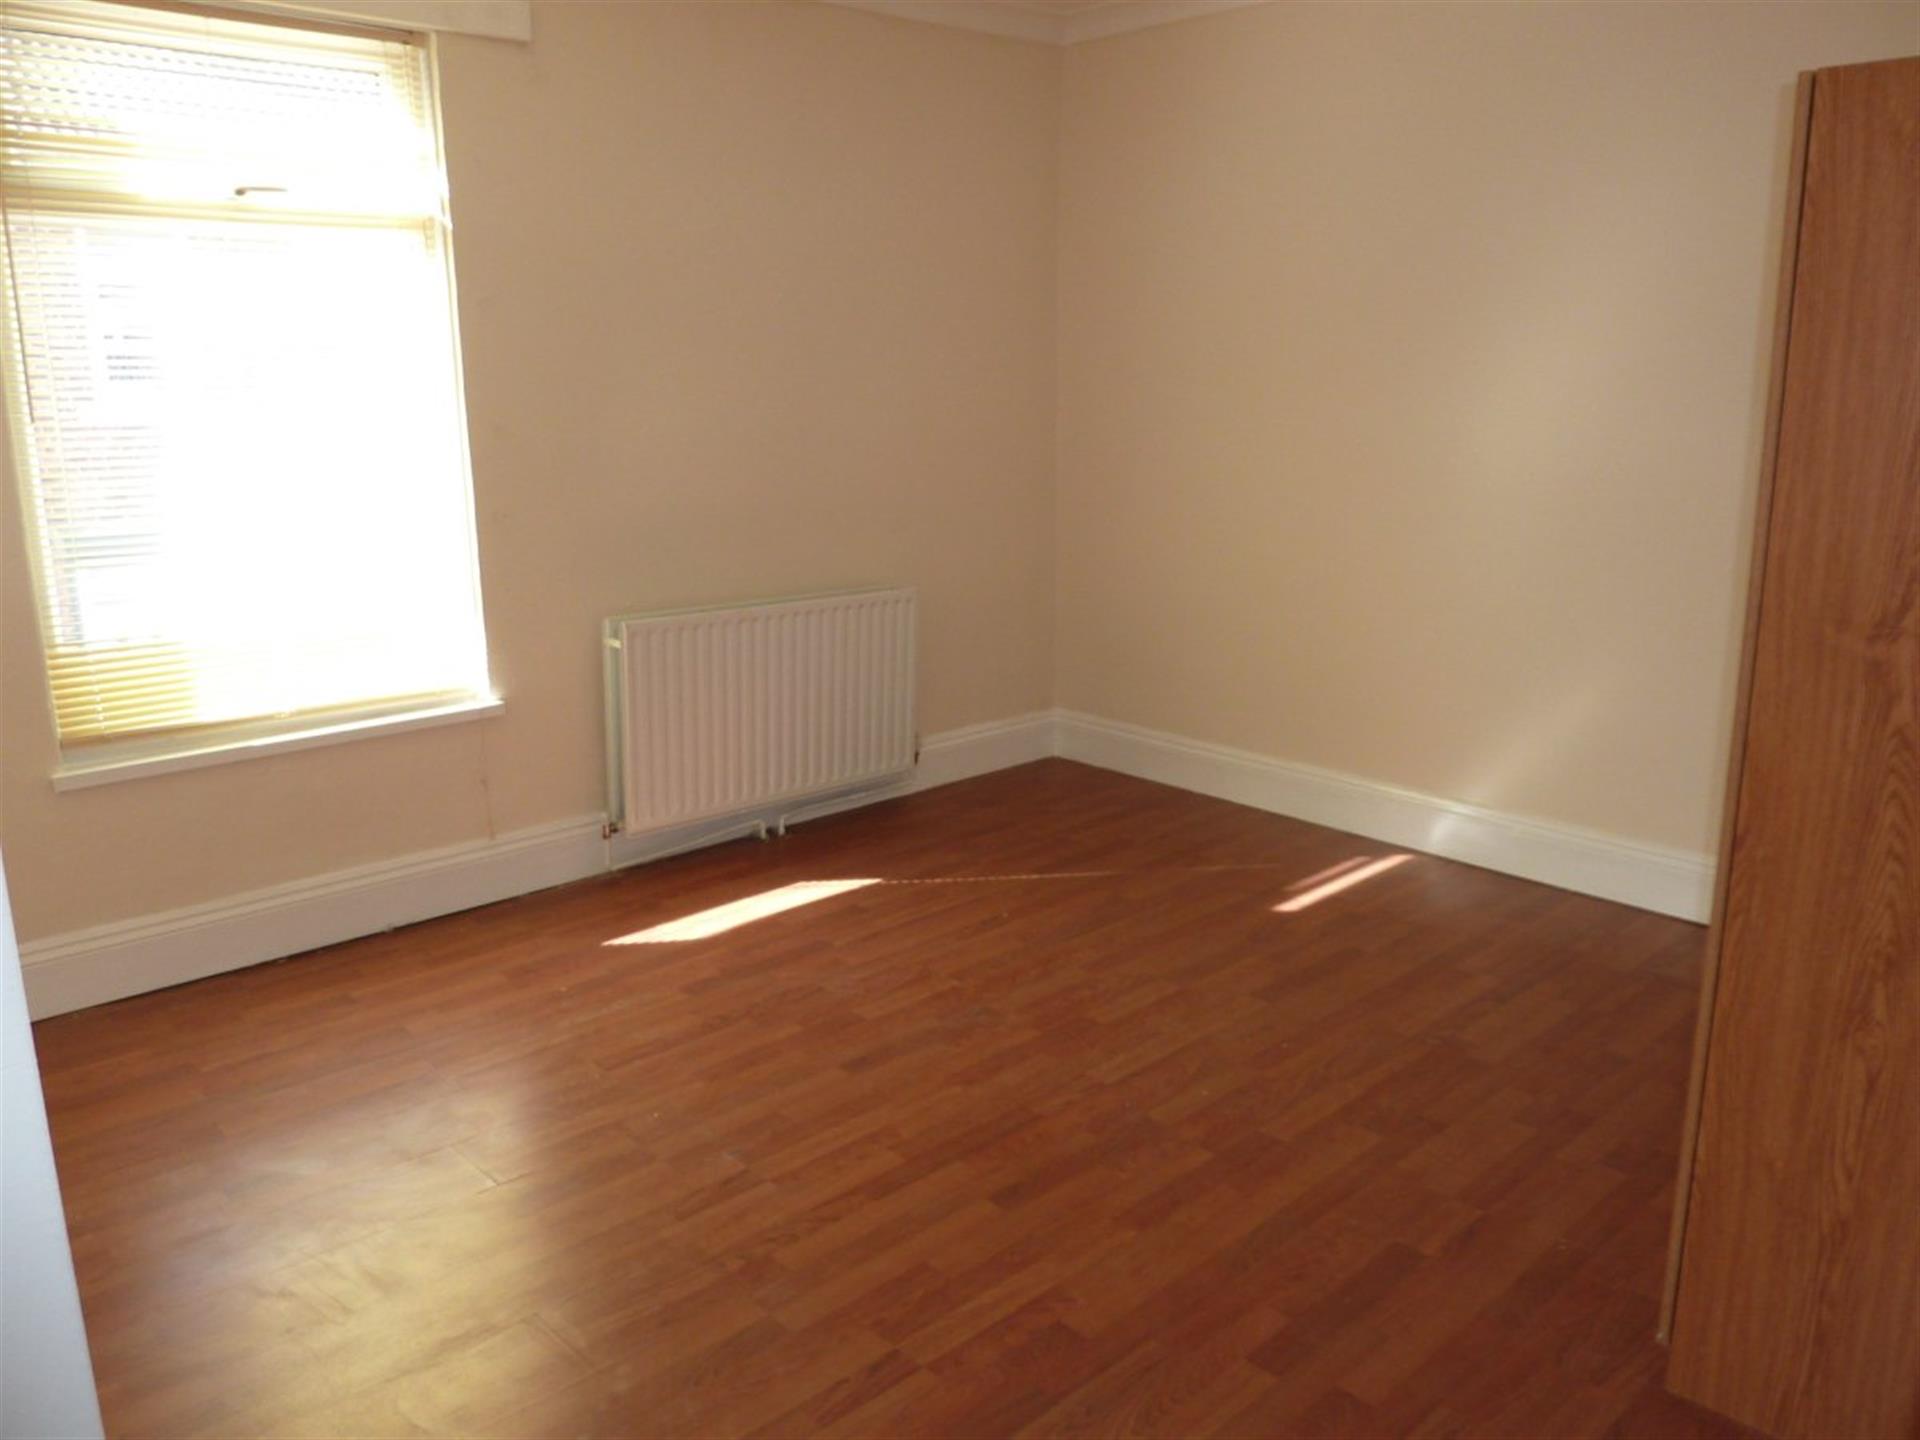 3 bedroom terraced house To Let in Bishop Auckland - photograph 5.